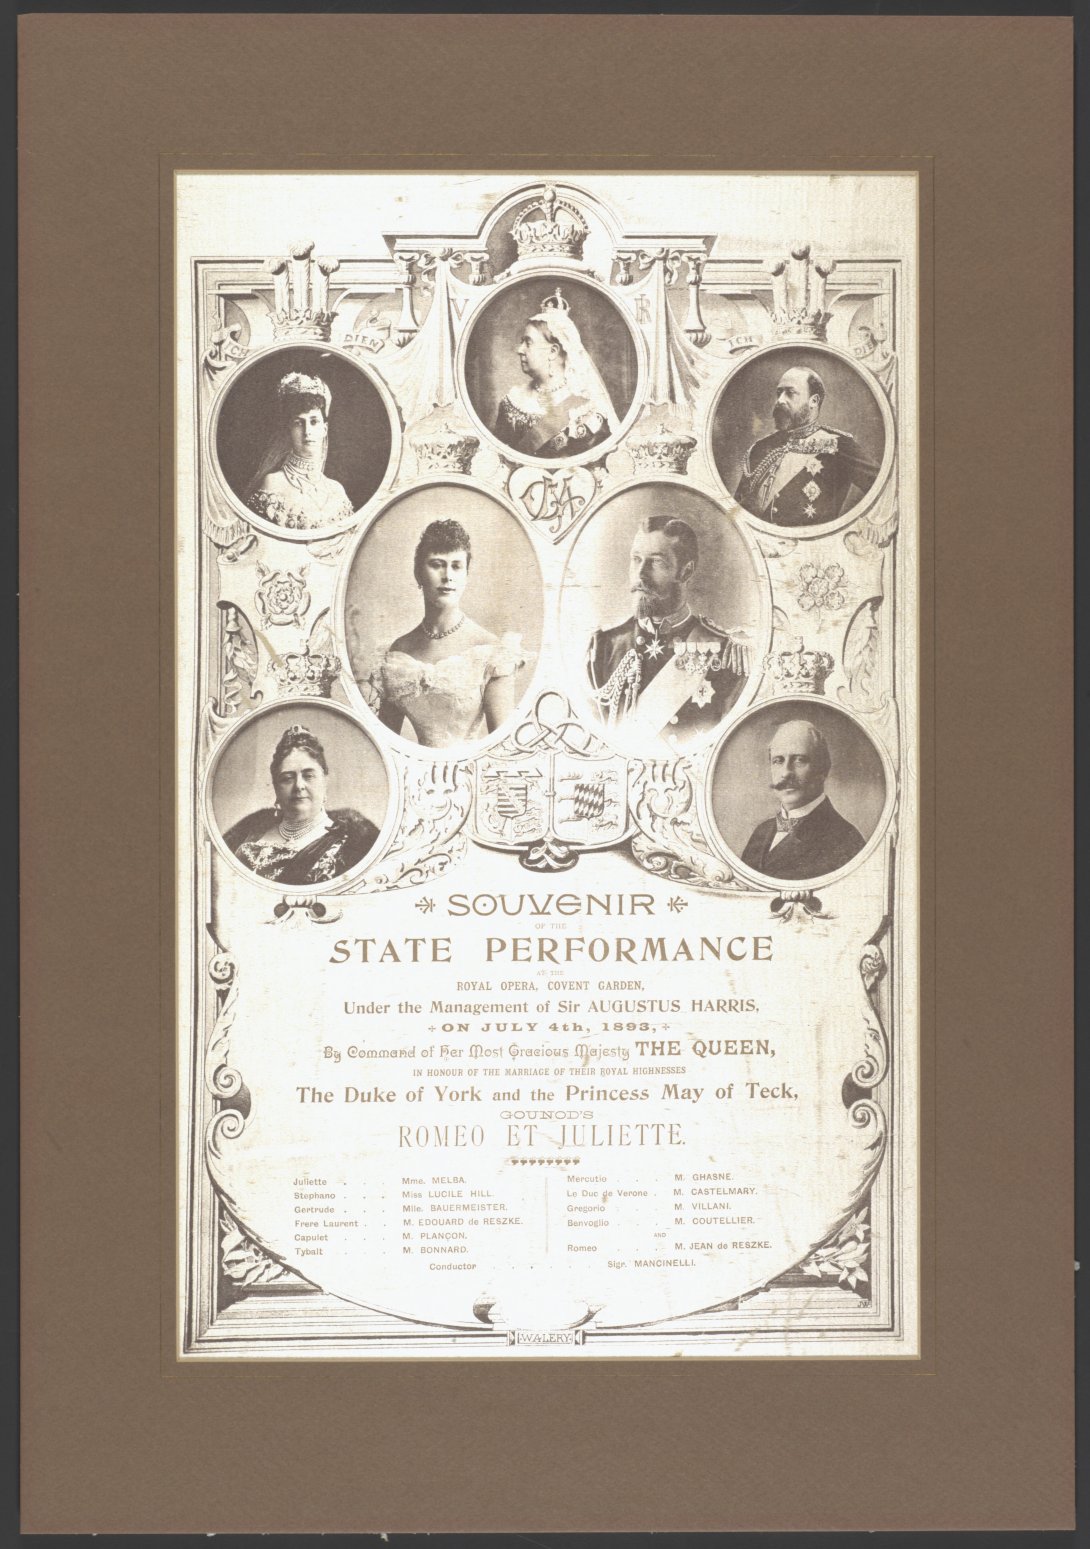 A sepia page with round and oval portraits of people in royal clothes from the Victorian era and text describing the performance and the cast list. The title text is: Souvenir State Performance.